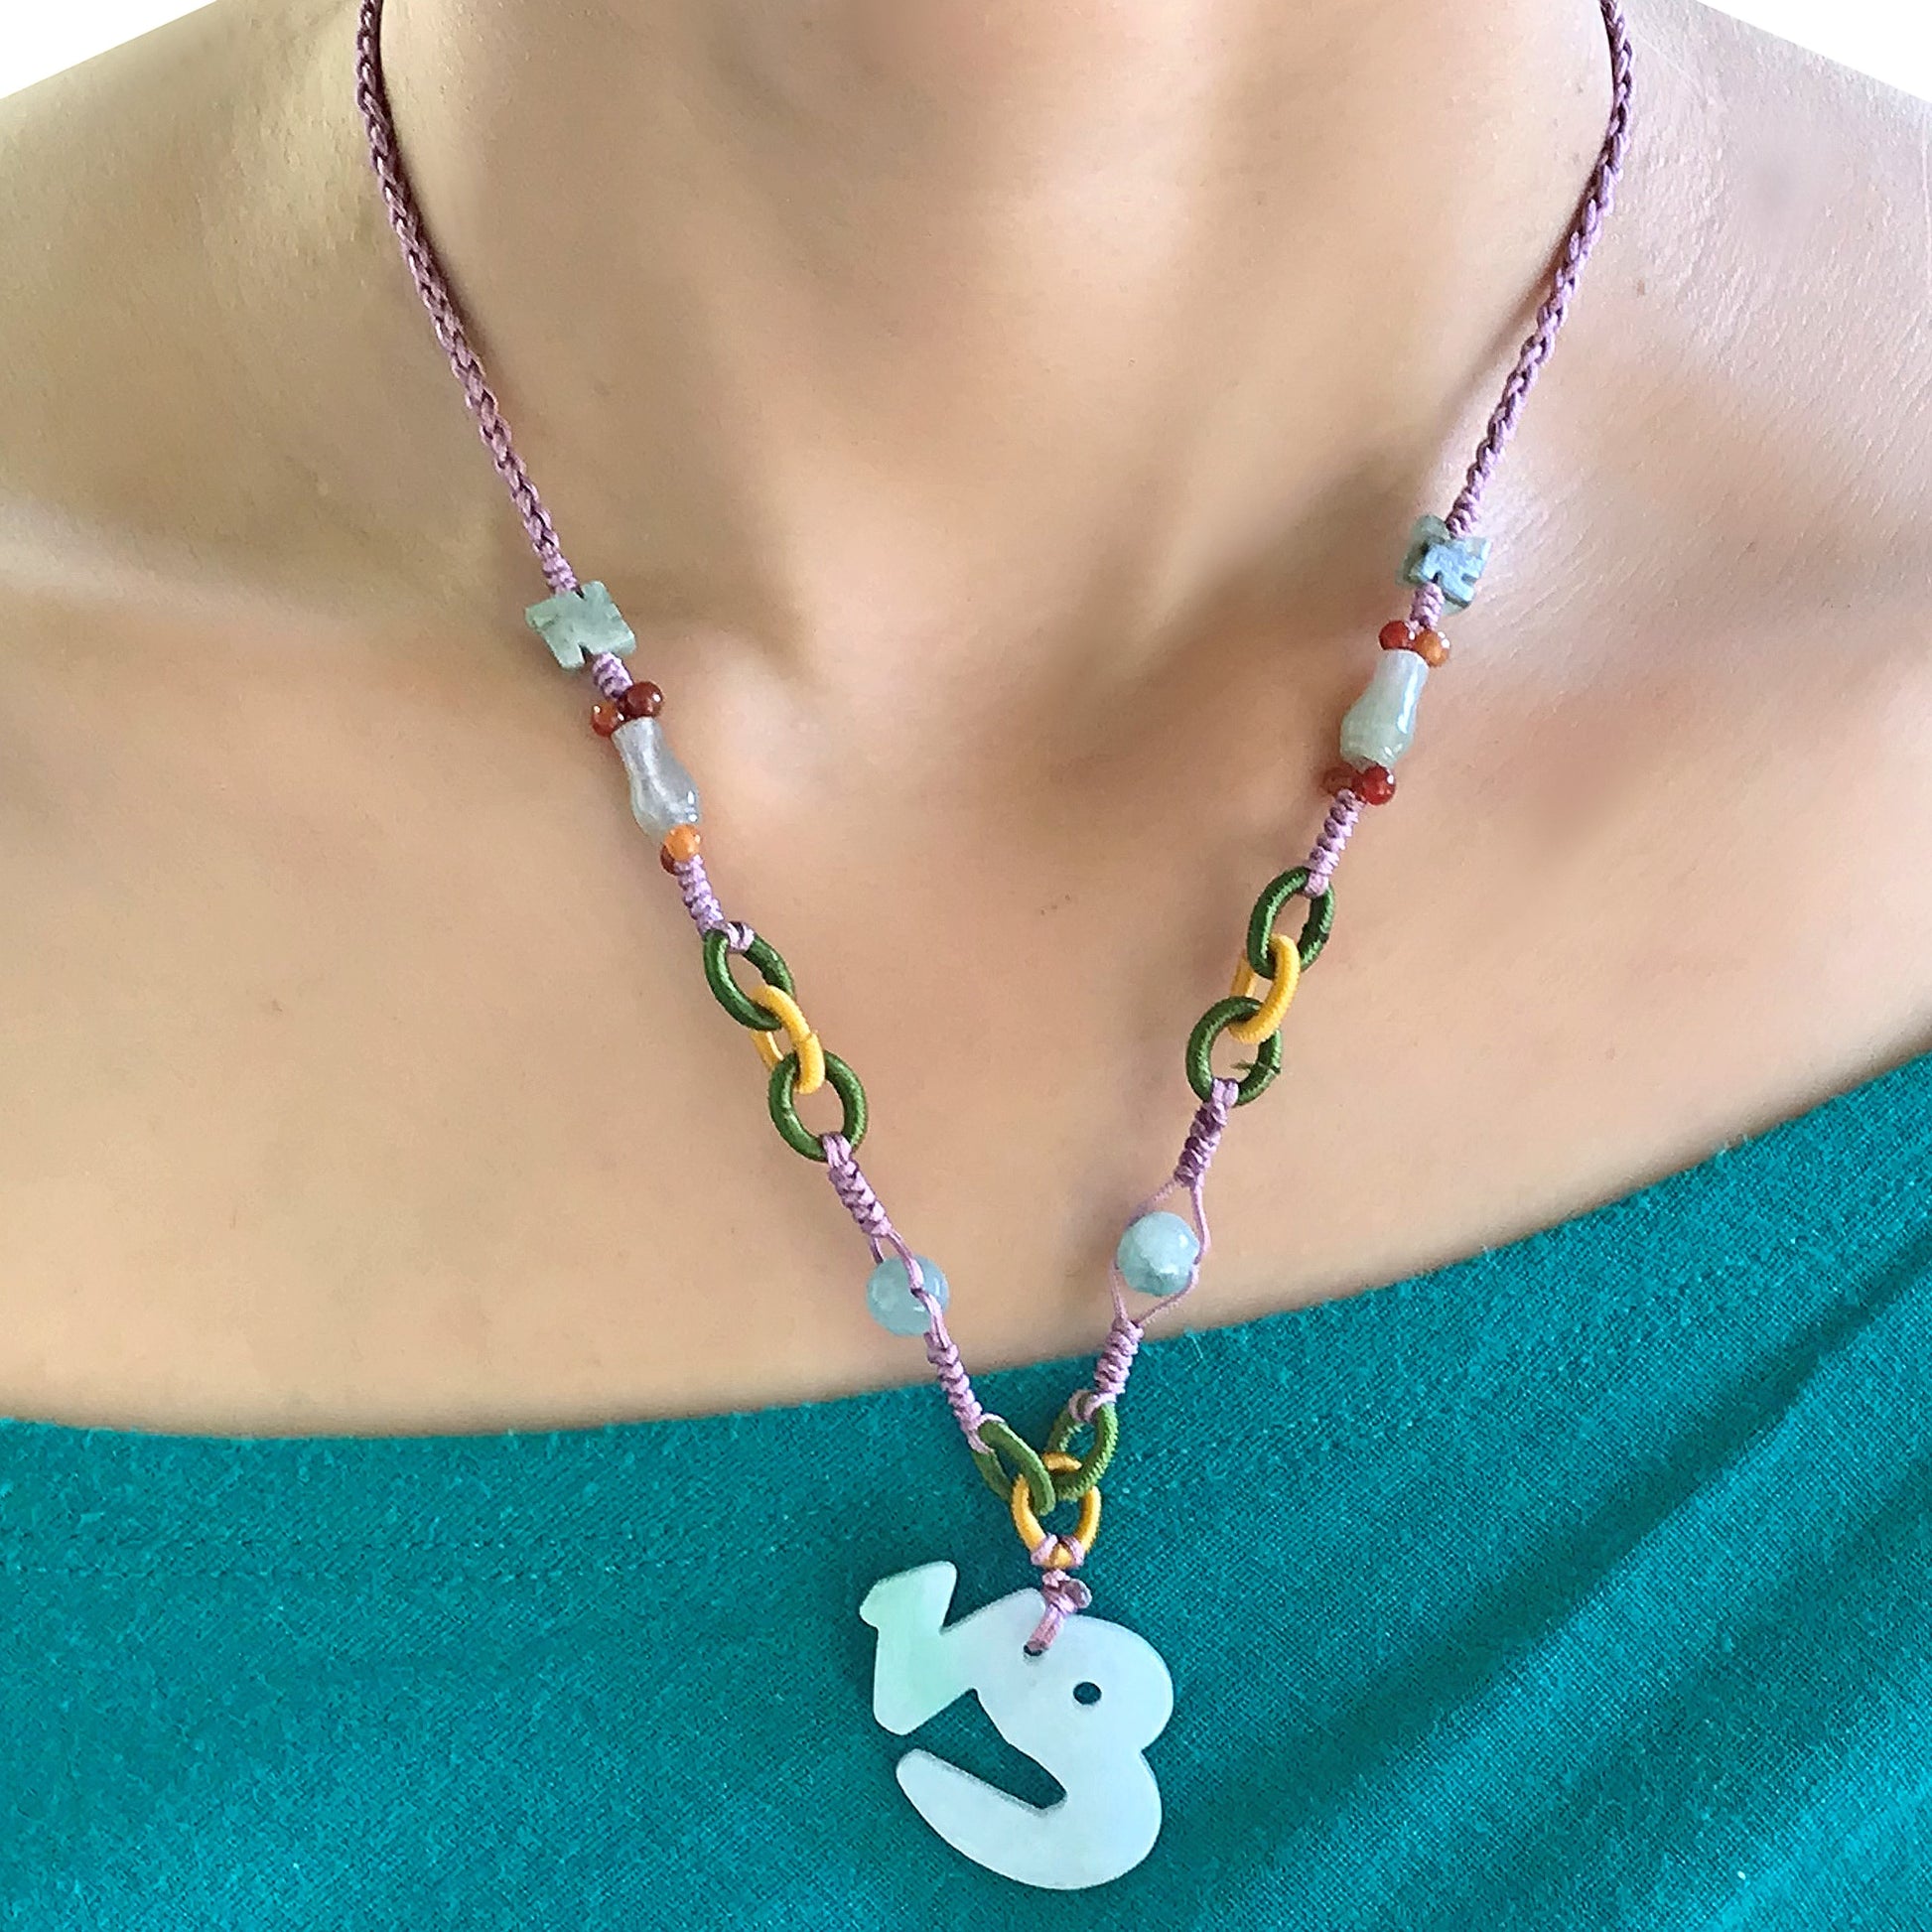 Feel the Love and Passion with a Capricorn Handmade Jade Pendant made with Lavender Cord